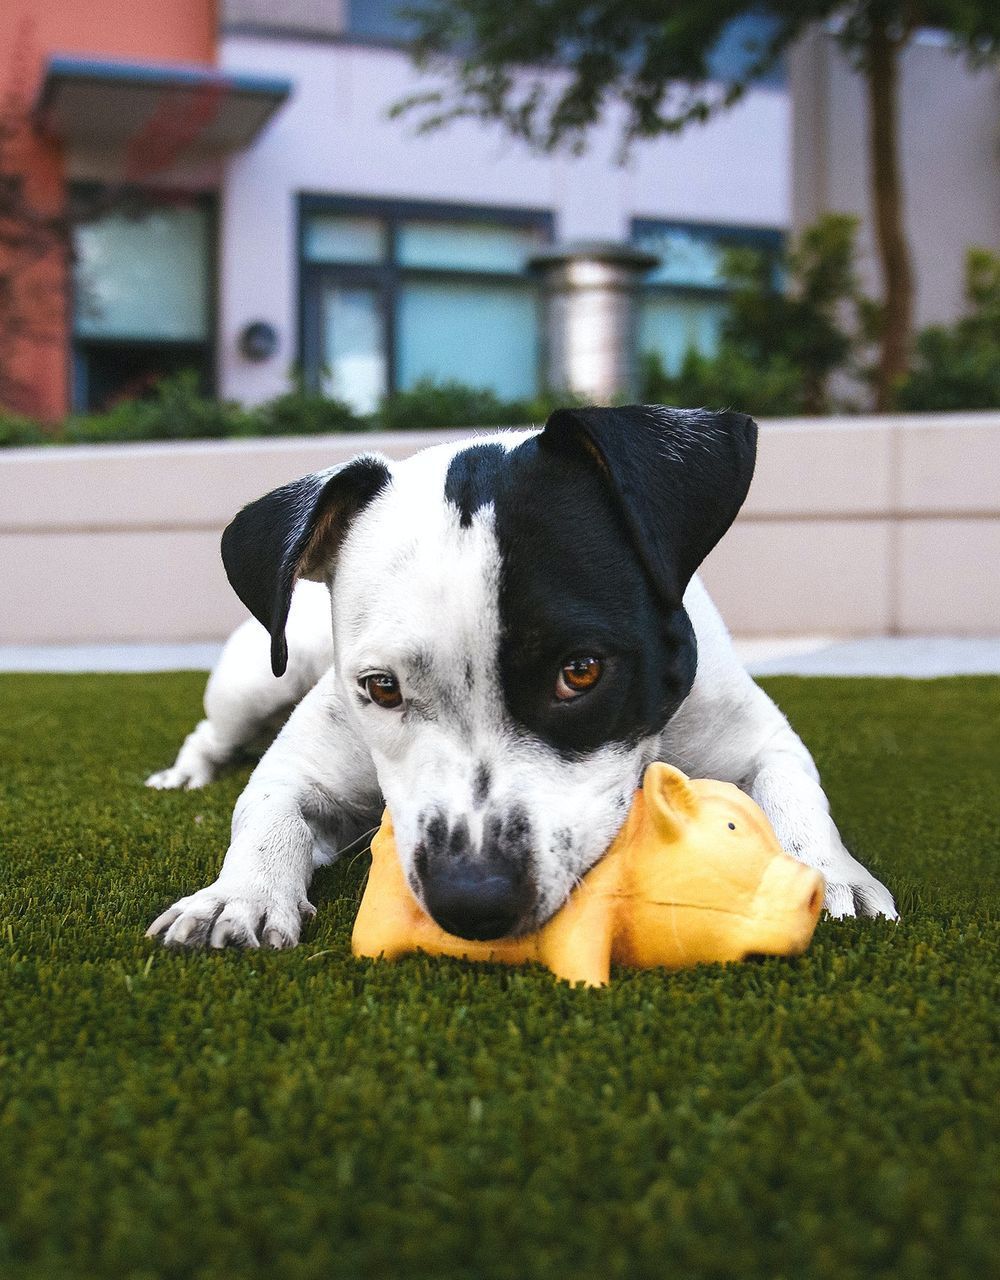 A black and white dog is laying on the grass with a yellow piggy bank in its mouth.